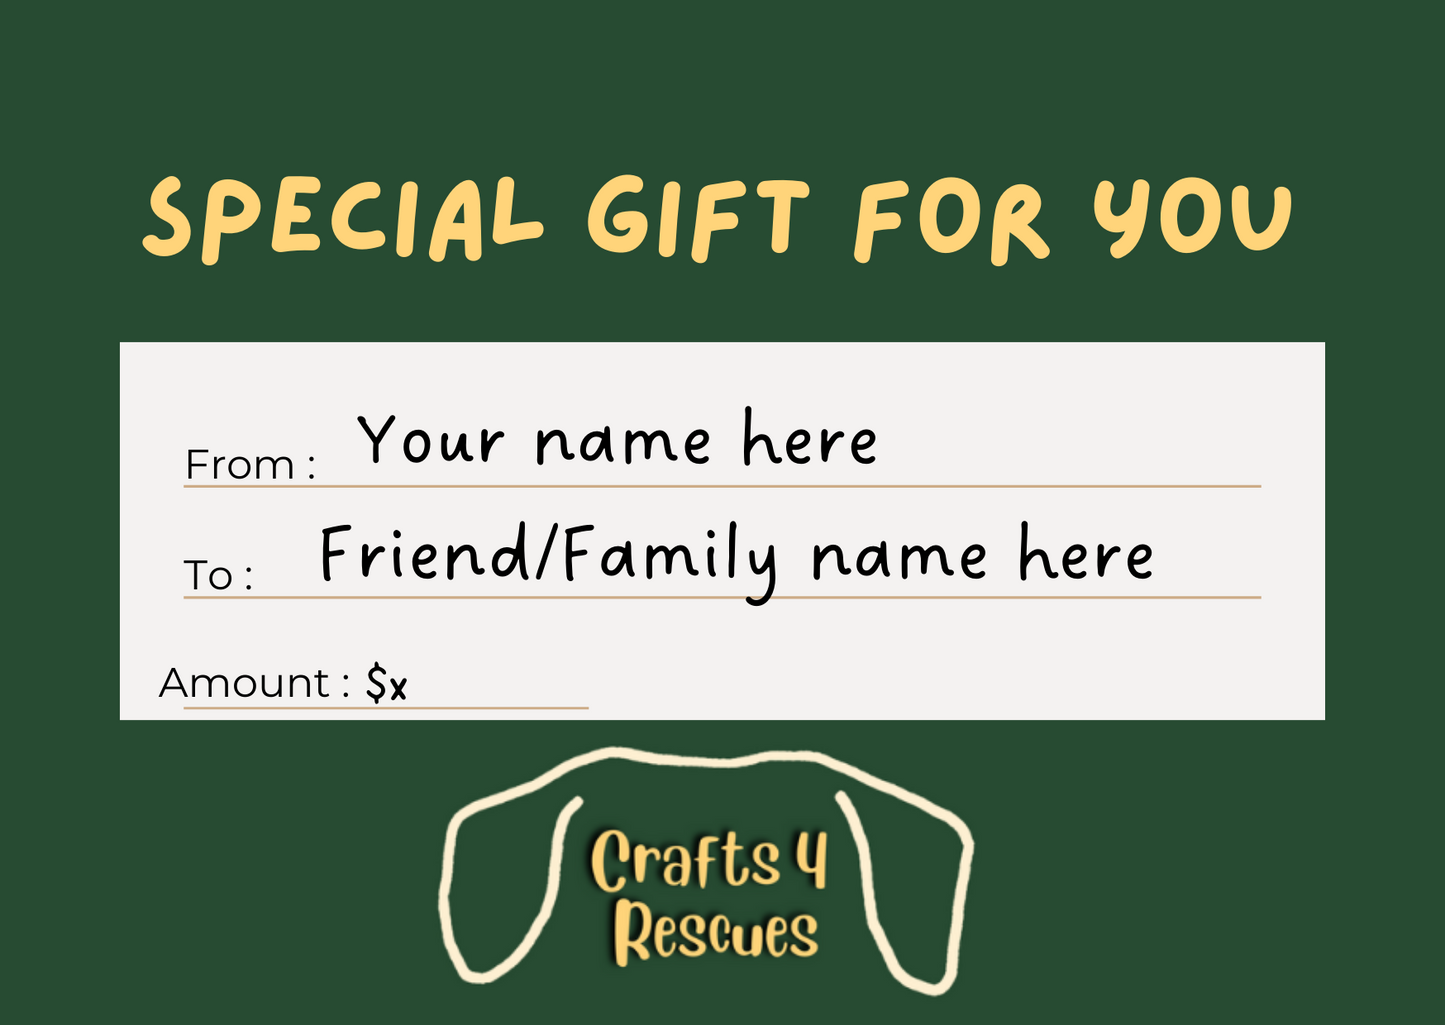 Crafts 4 Rescues Gift Card